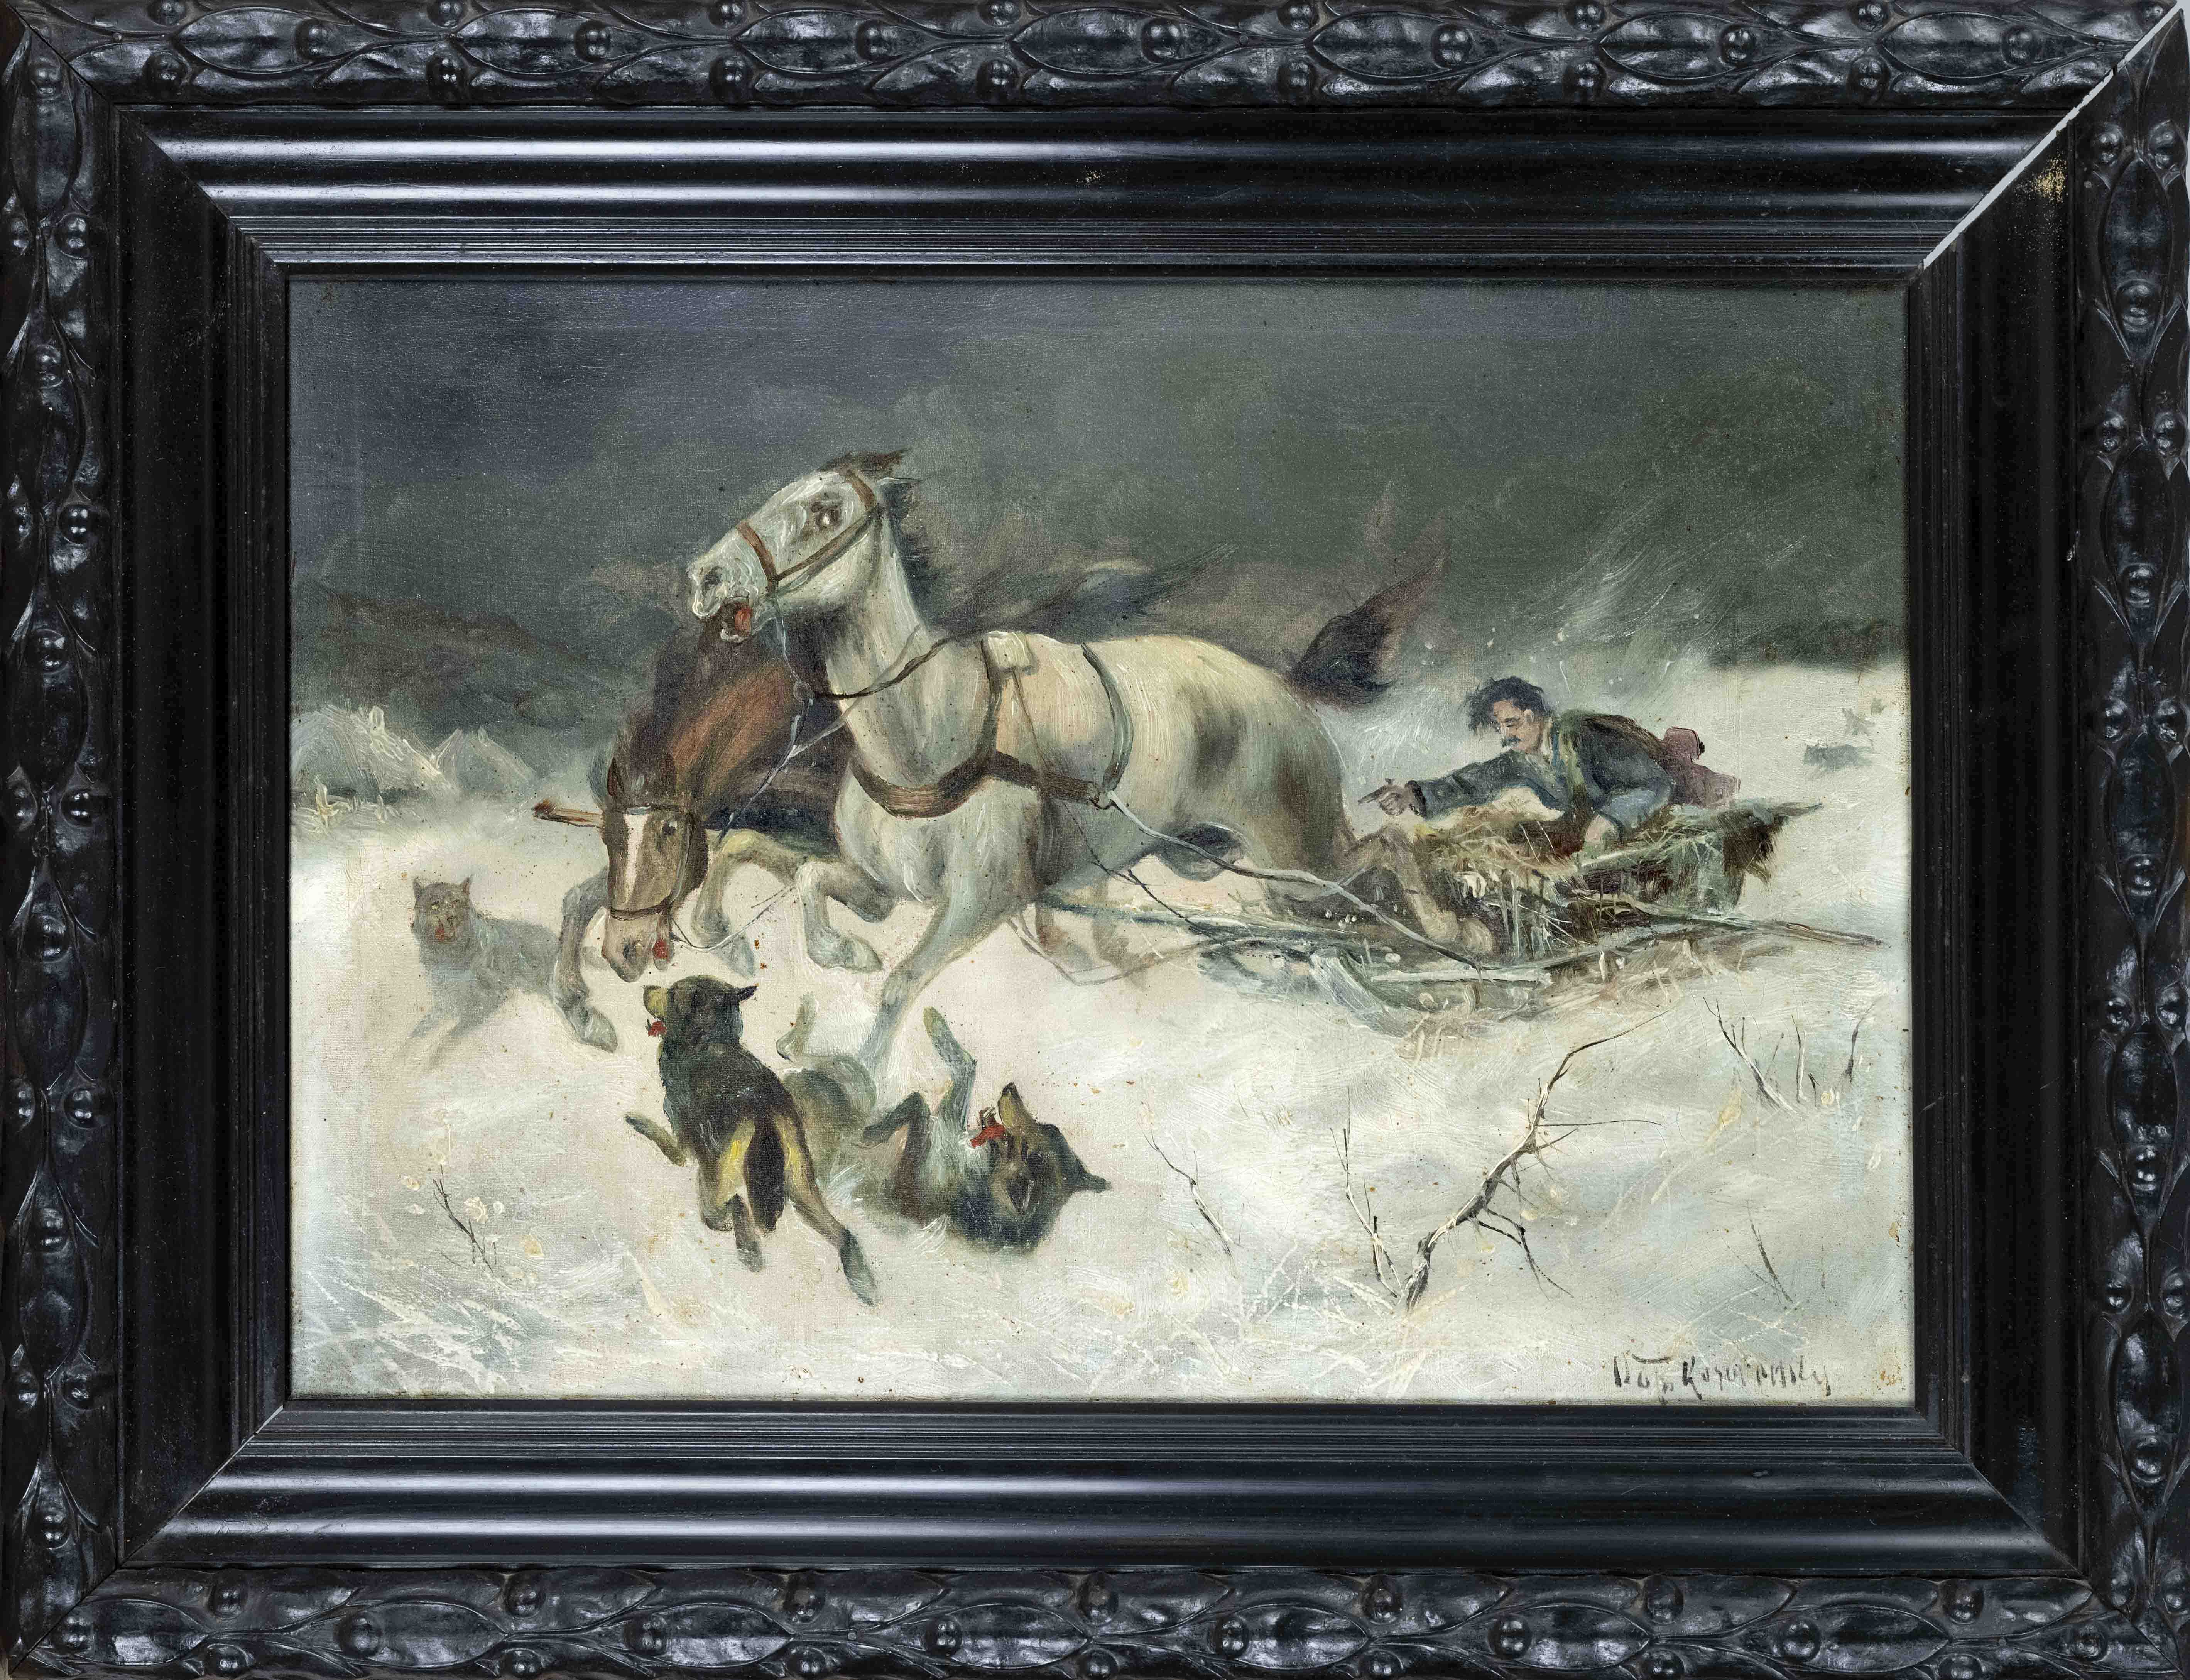 Polish painter c. 1900, Winter landscape with horse-drawn sleigh attacked by wolves, oil on